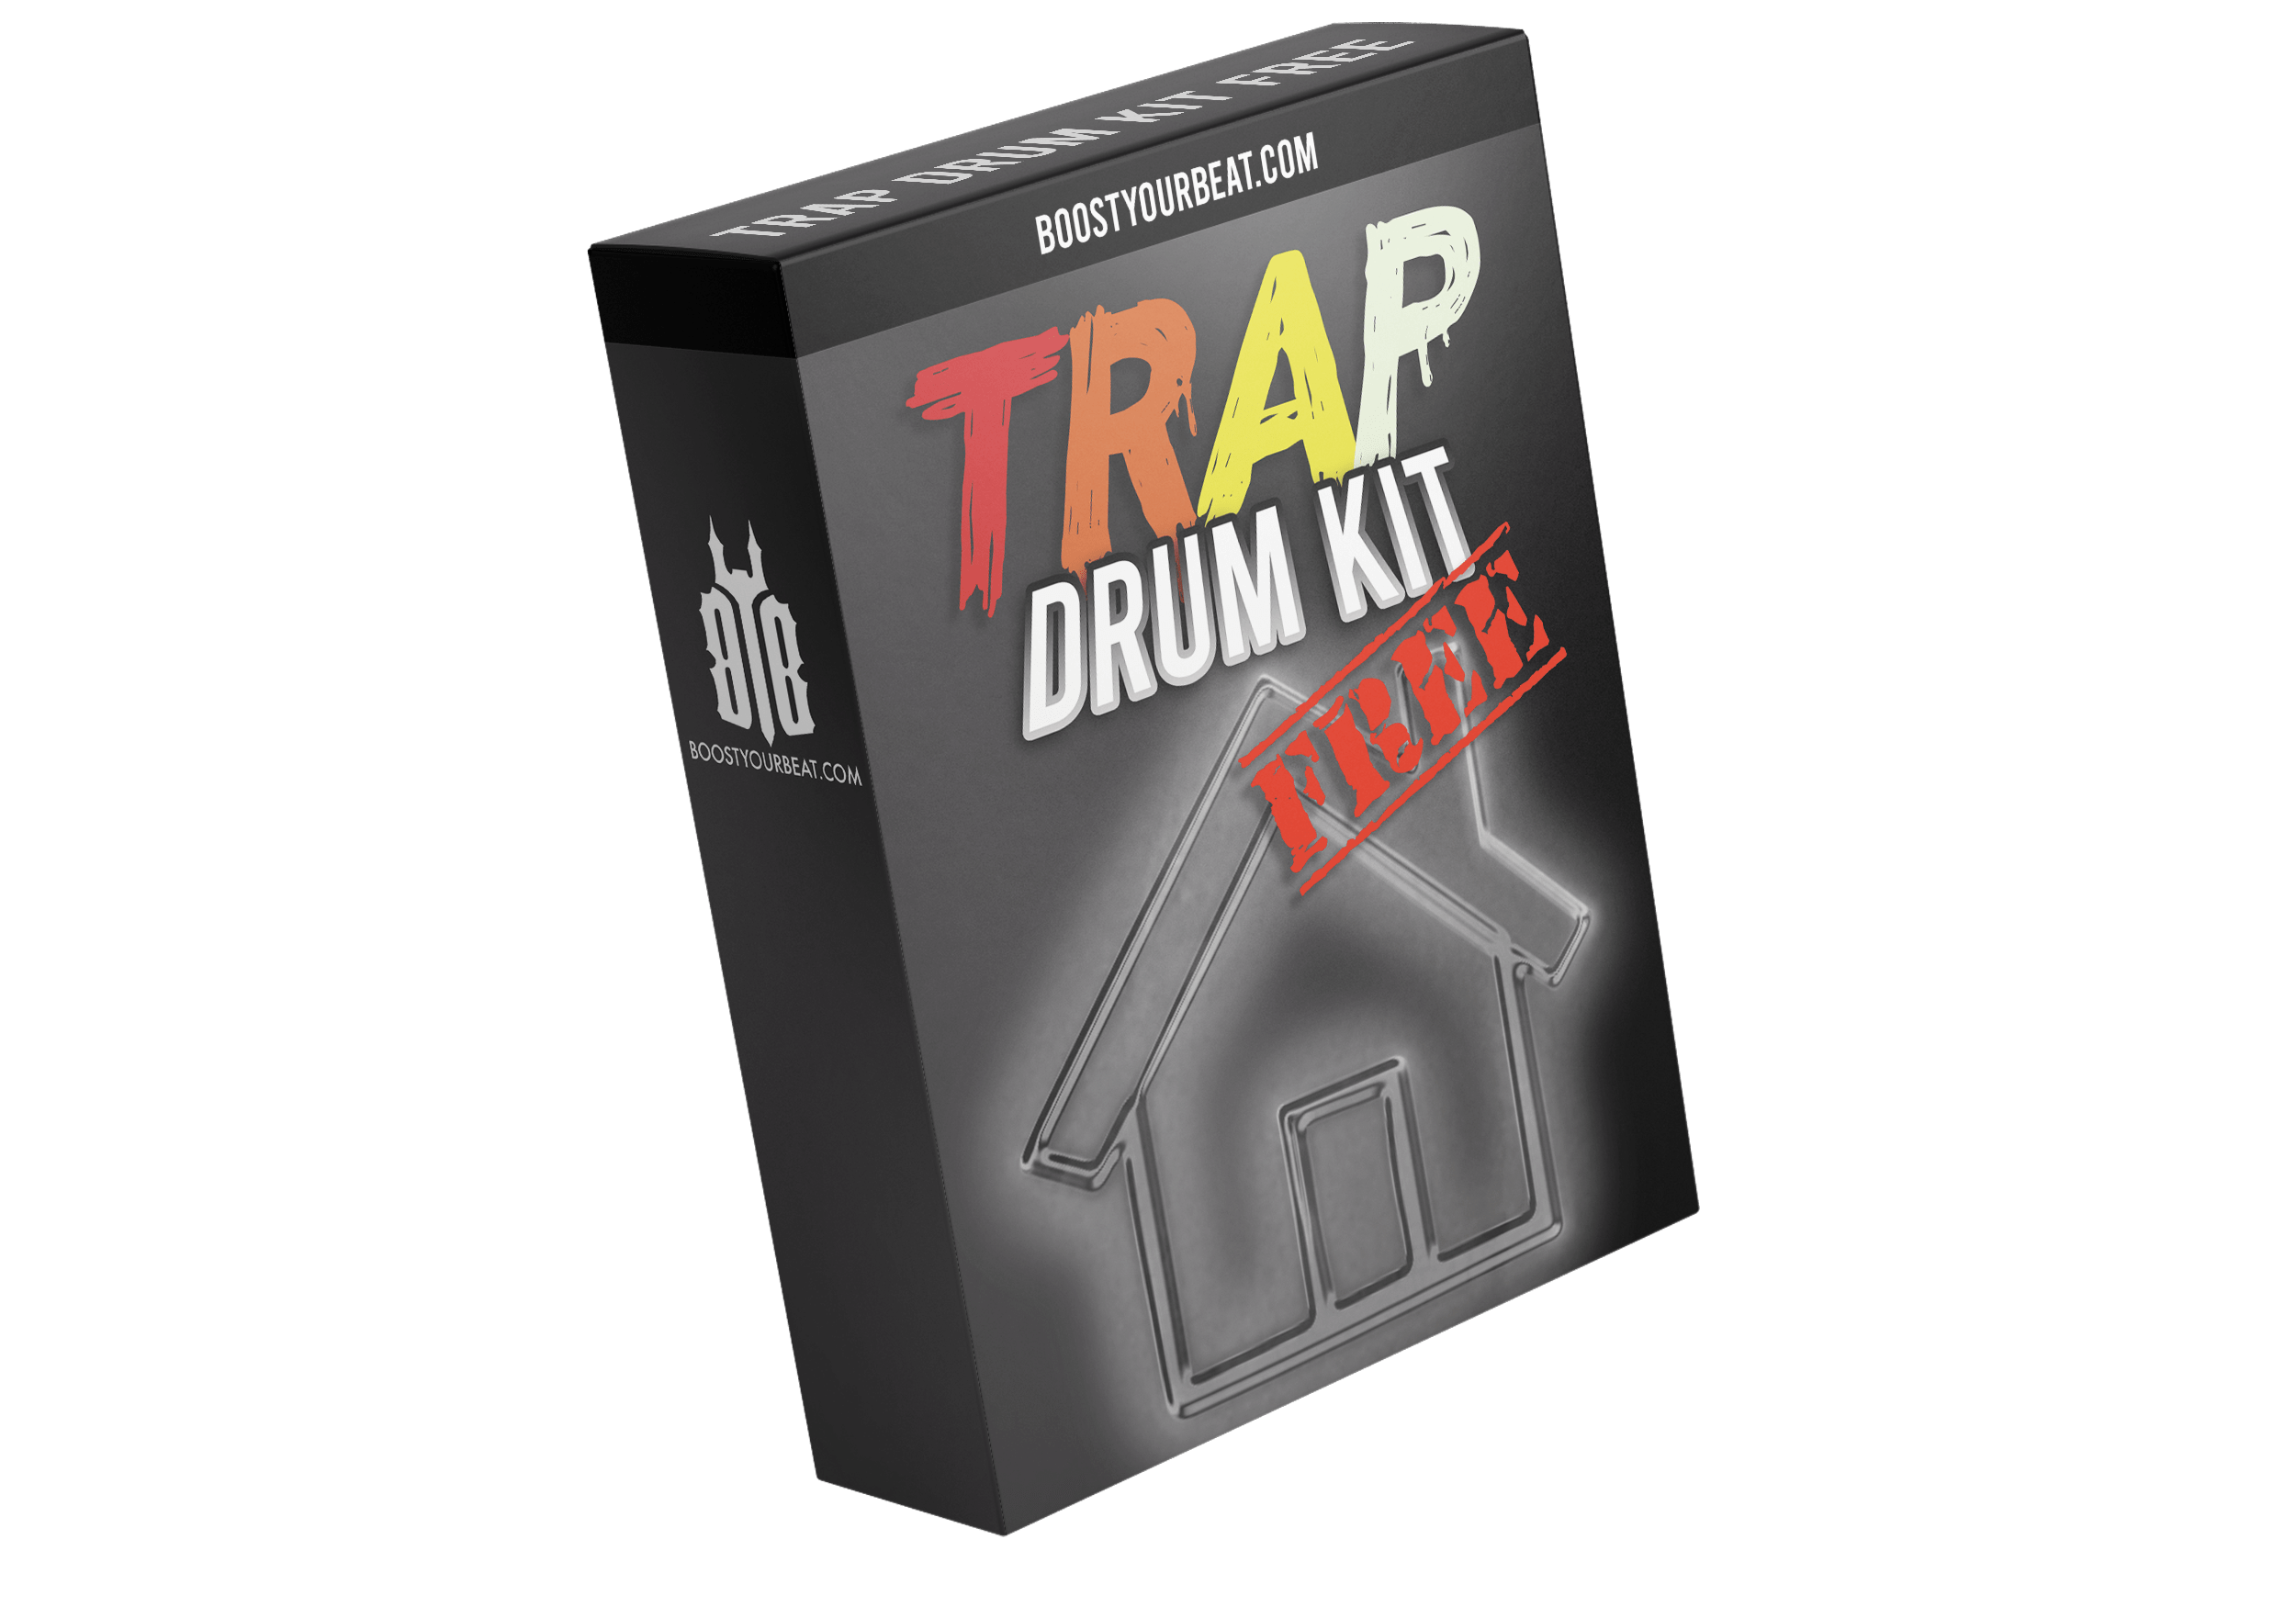 for hard trap free drum kits